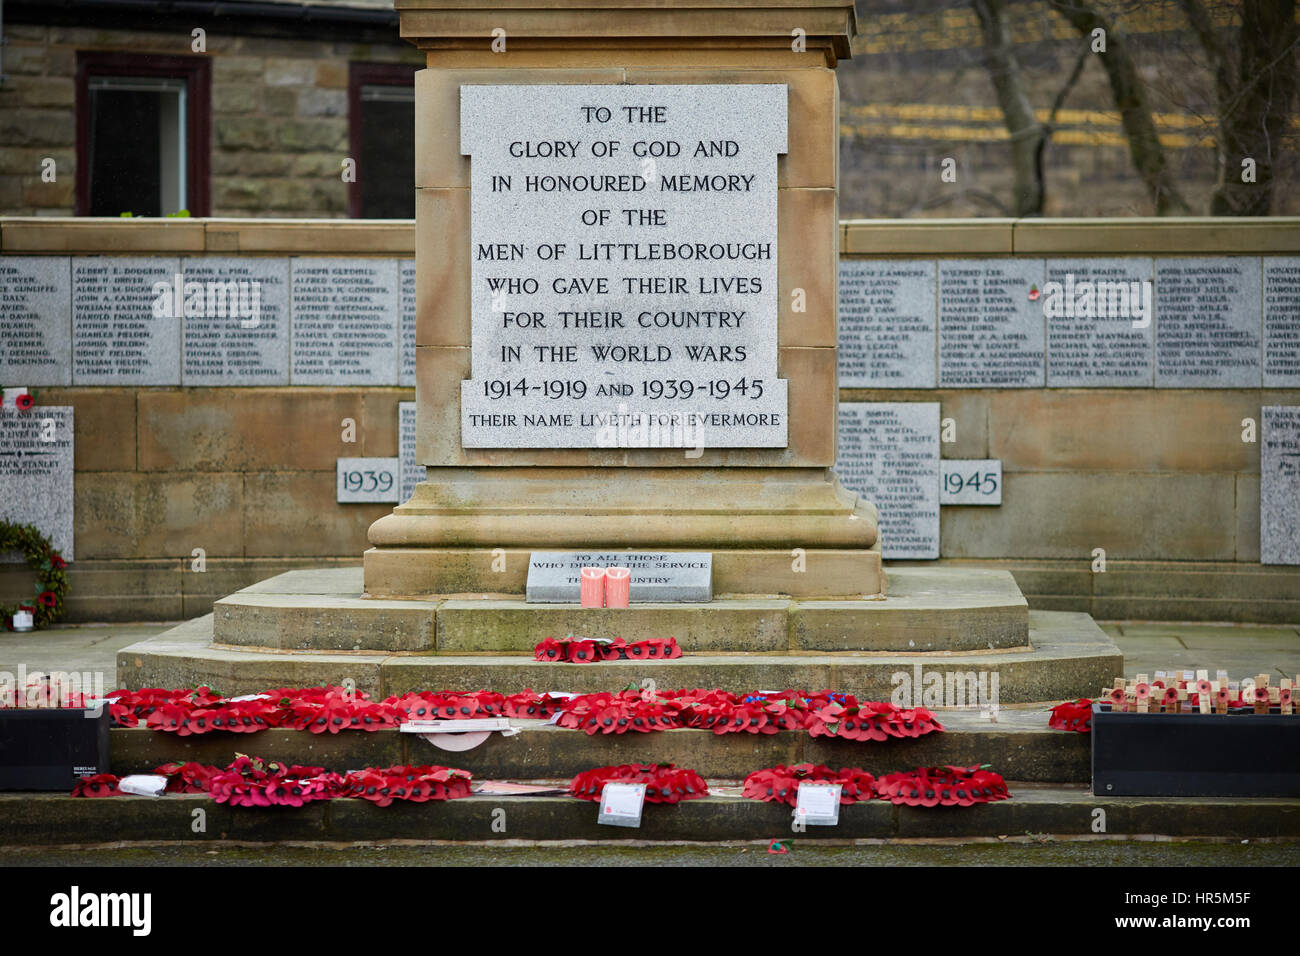 British legion remembrance day Poppies around cenotaph in the village of Littleborough, Rochdale, Lancashire, England, UK. Stock Photo